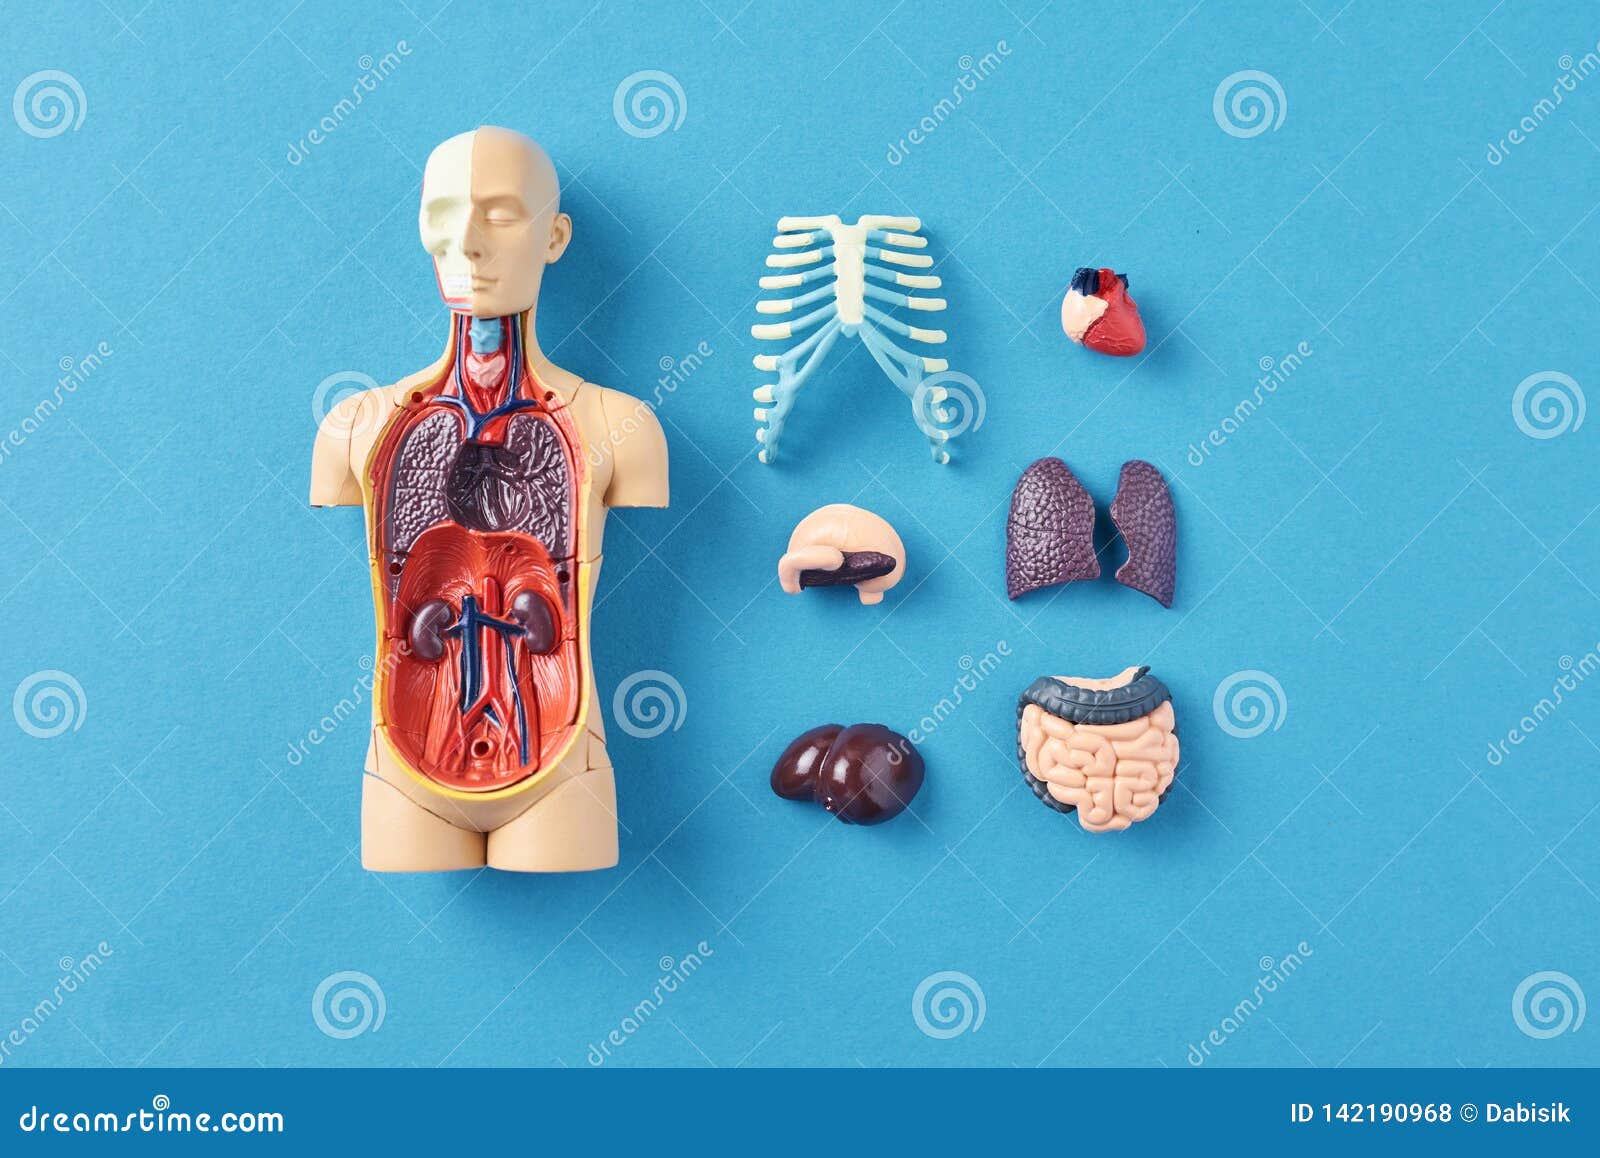 Human Anatomy Mannequin With Internal Organs On A Blue